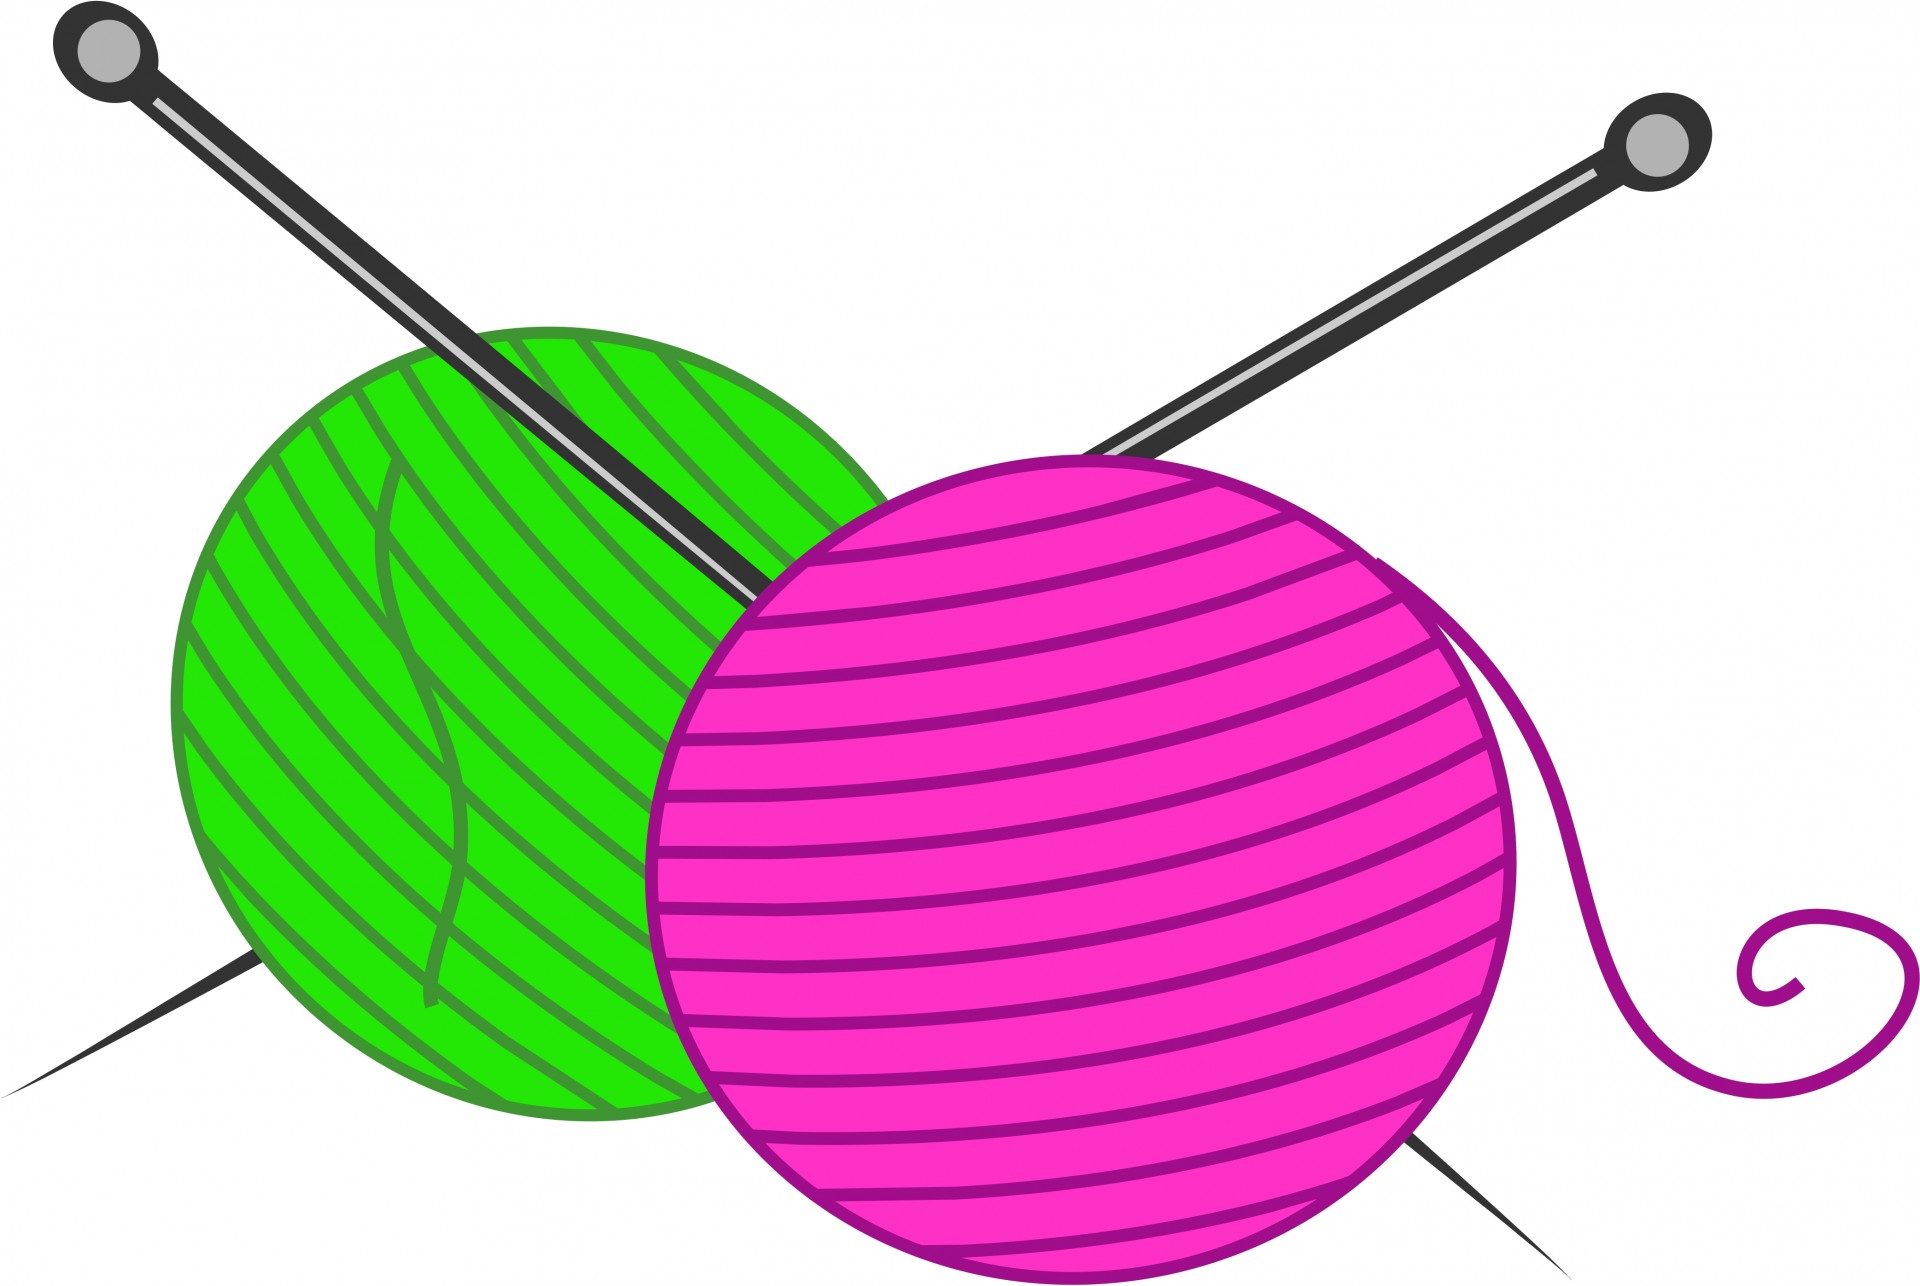 Clip Arts Related To : ball of wool clipart. 